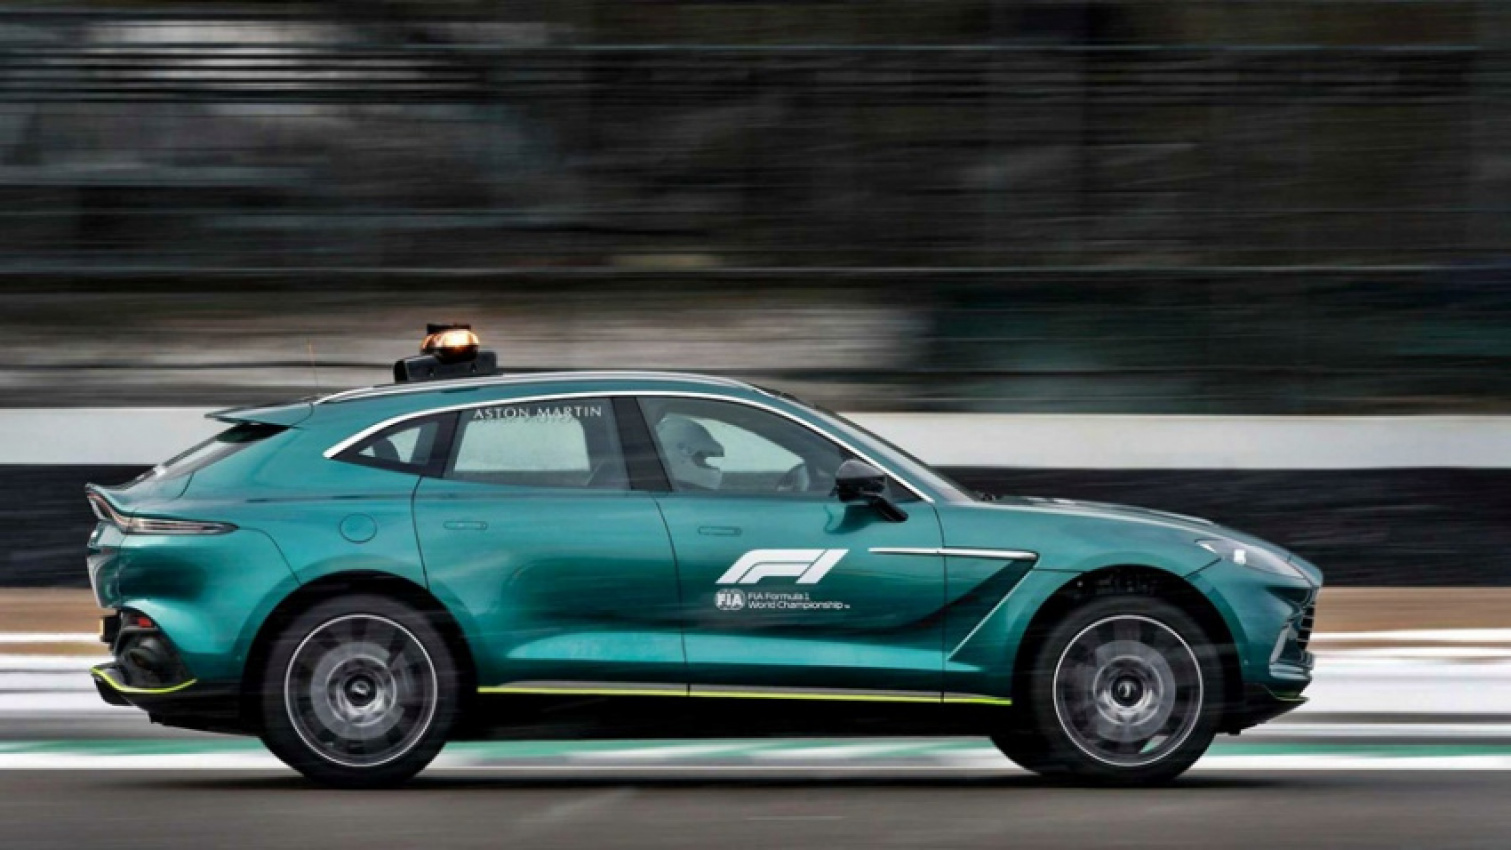 aston martin, autos, cars, mercedes-benz, mg, fia safety car, formula 1 safety car, mercedes, mercedes amg, aston martins replace mercedes-amg official safety and medical cars at f1 races